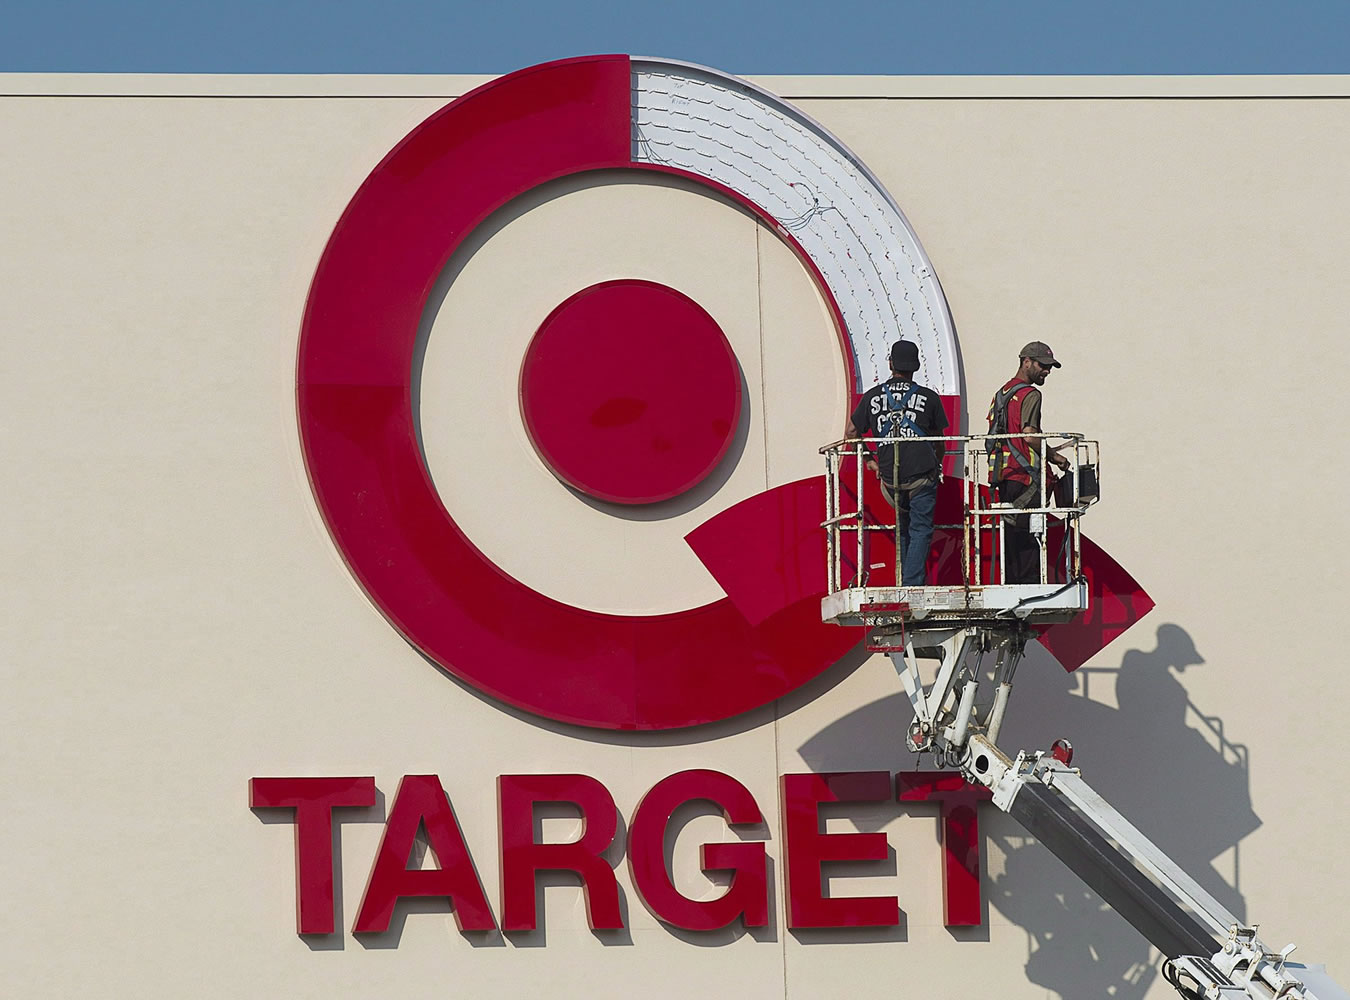 Workers install an outdoor sign at the new Target store at the Mic Mac Mall in Dartmouth, Nova Scotia, in July 2013.